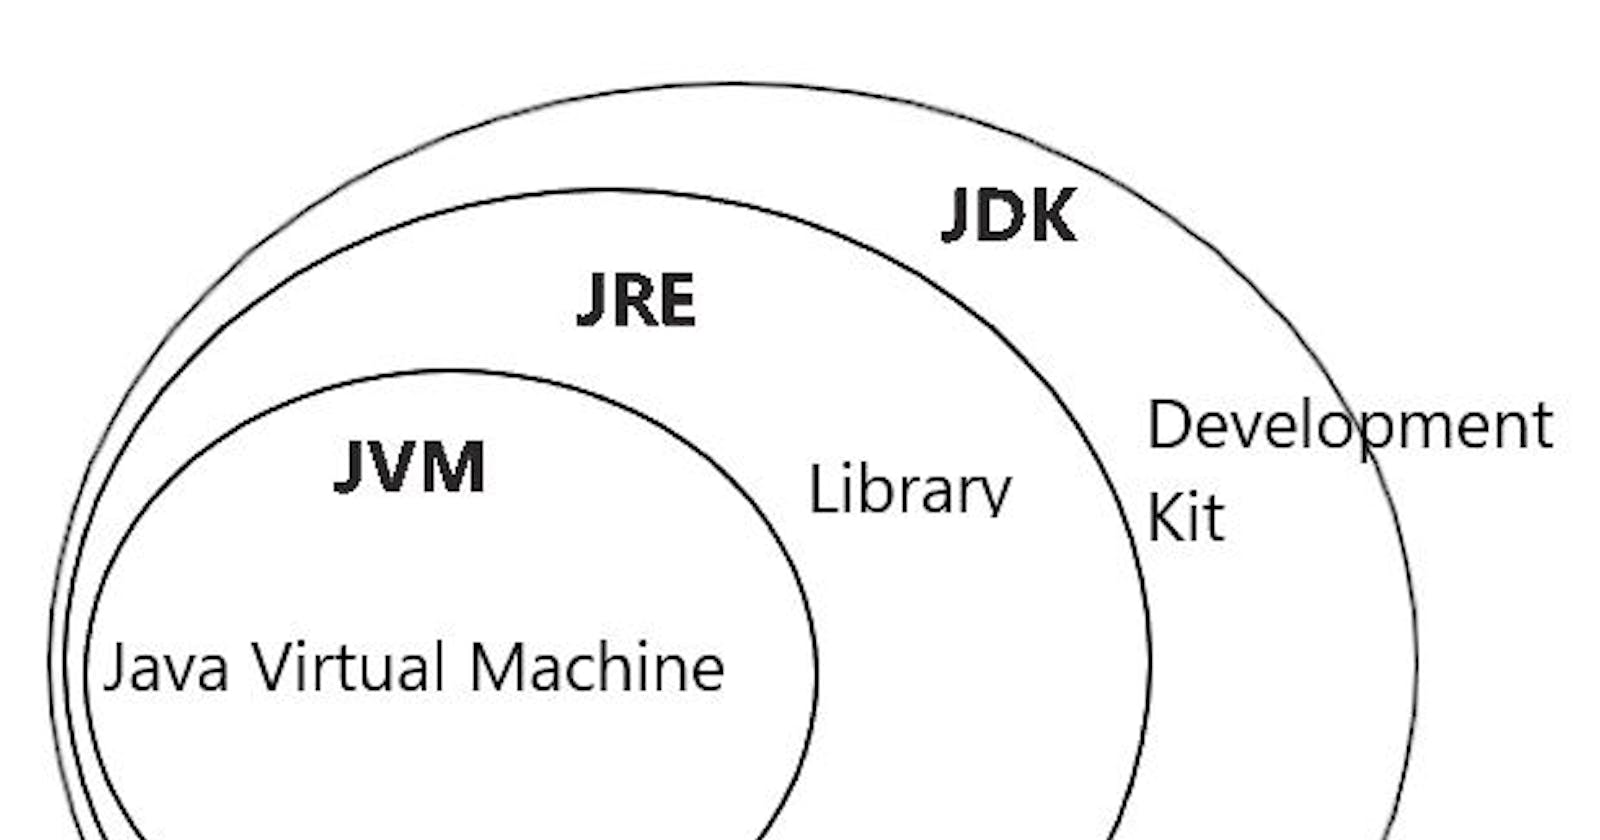 What is JDK & JRE & JVM